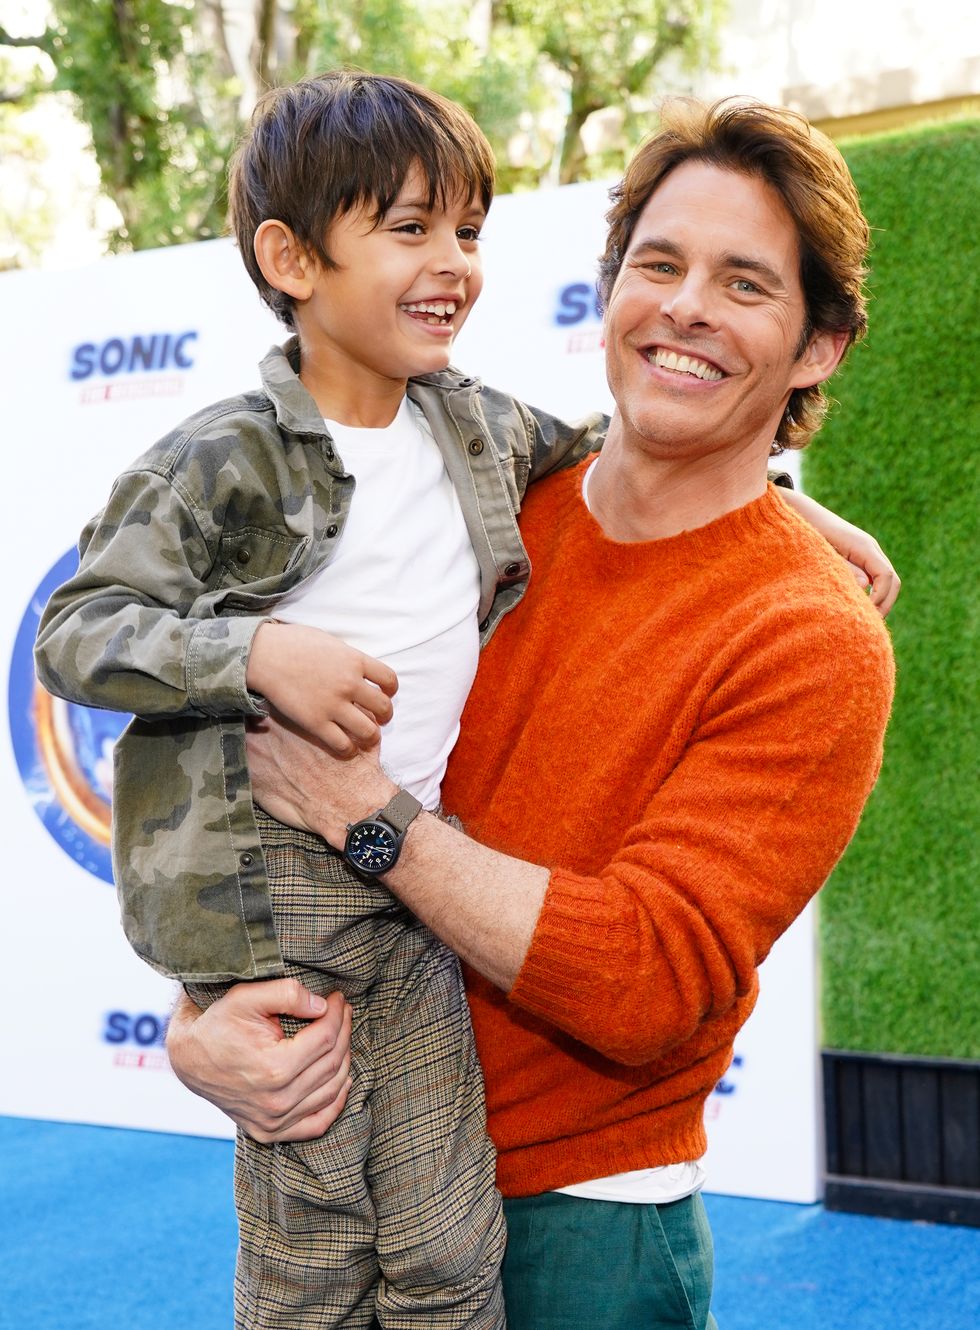 hollywood, california   january 25 james marsden r and his son attend sonic the hedgehog family day event at the paramount theatre on january 25, 2020 in hollywood, california photo by rachel lunagetty images